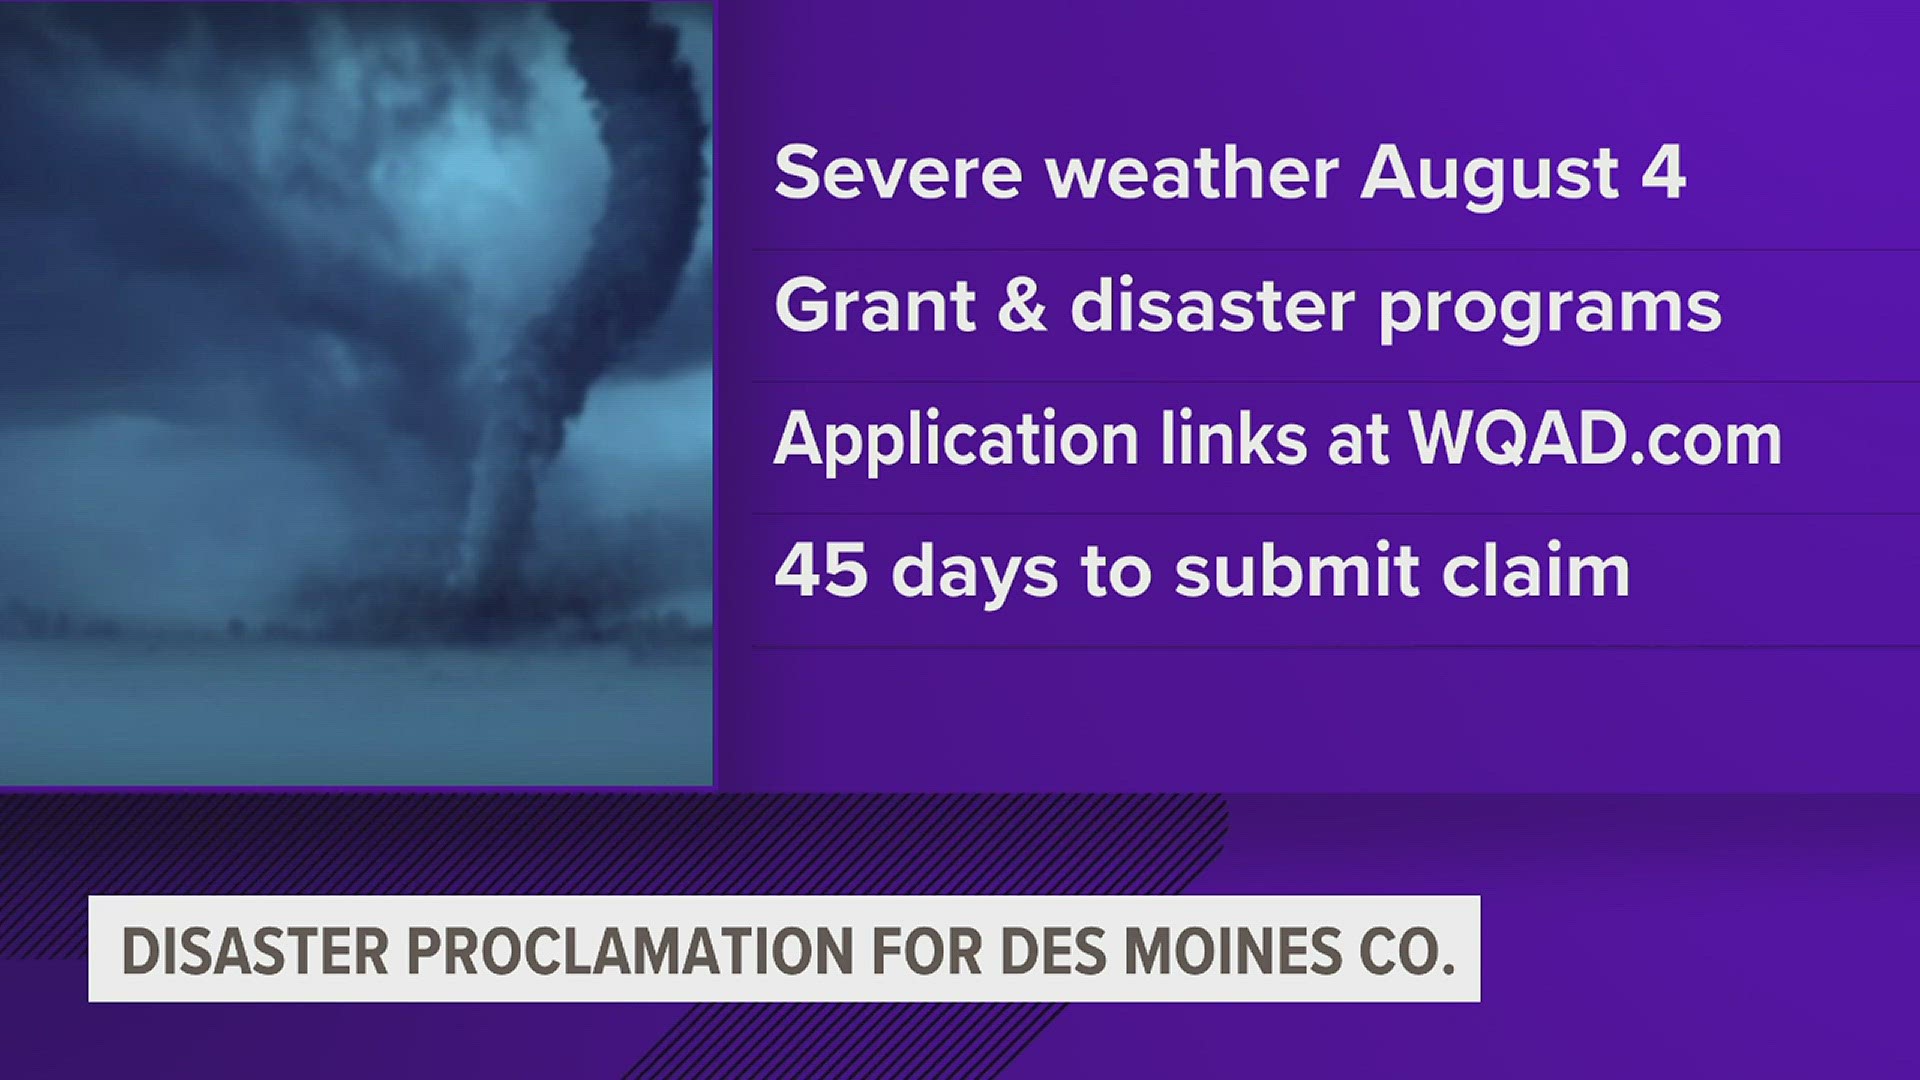 Storm victims have up to 45 days to submit a claim.